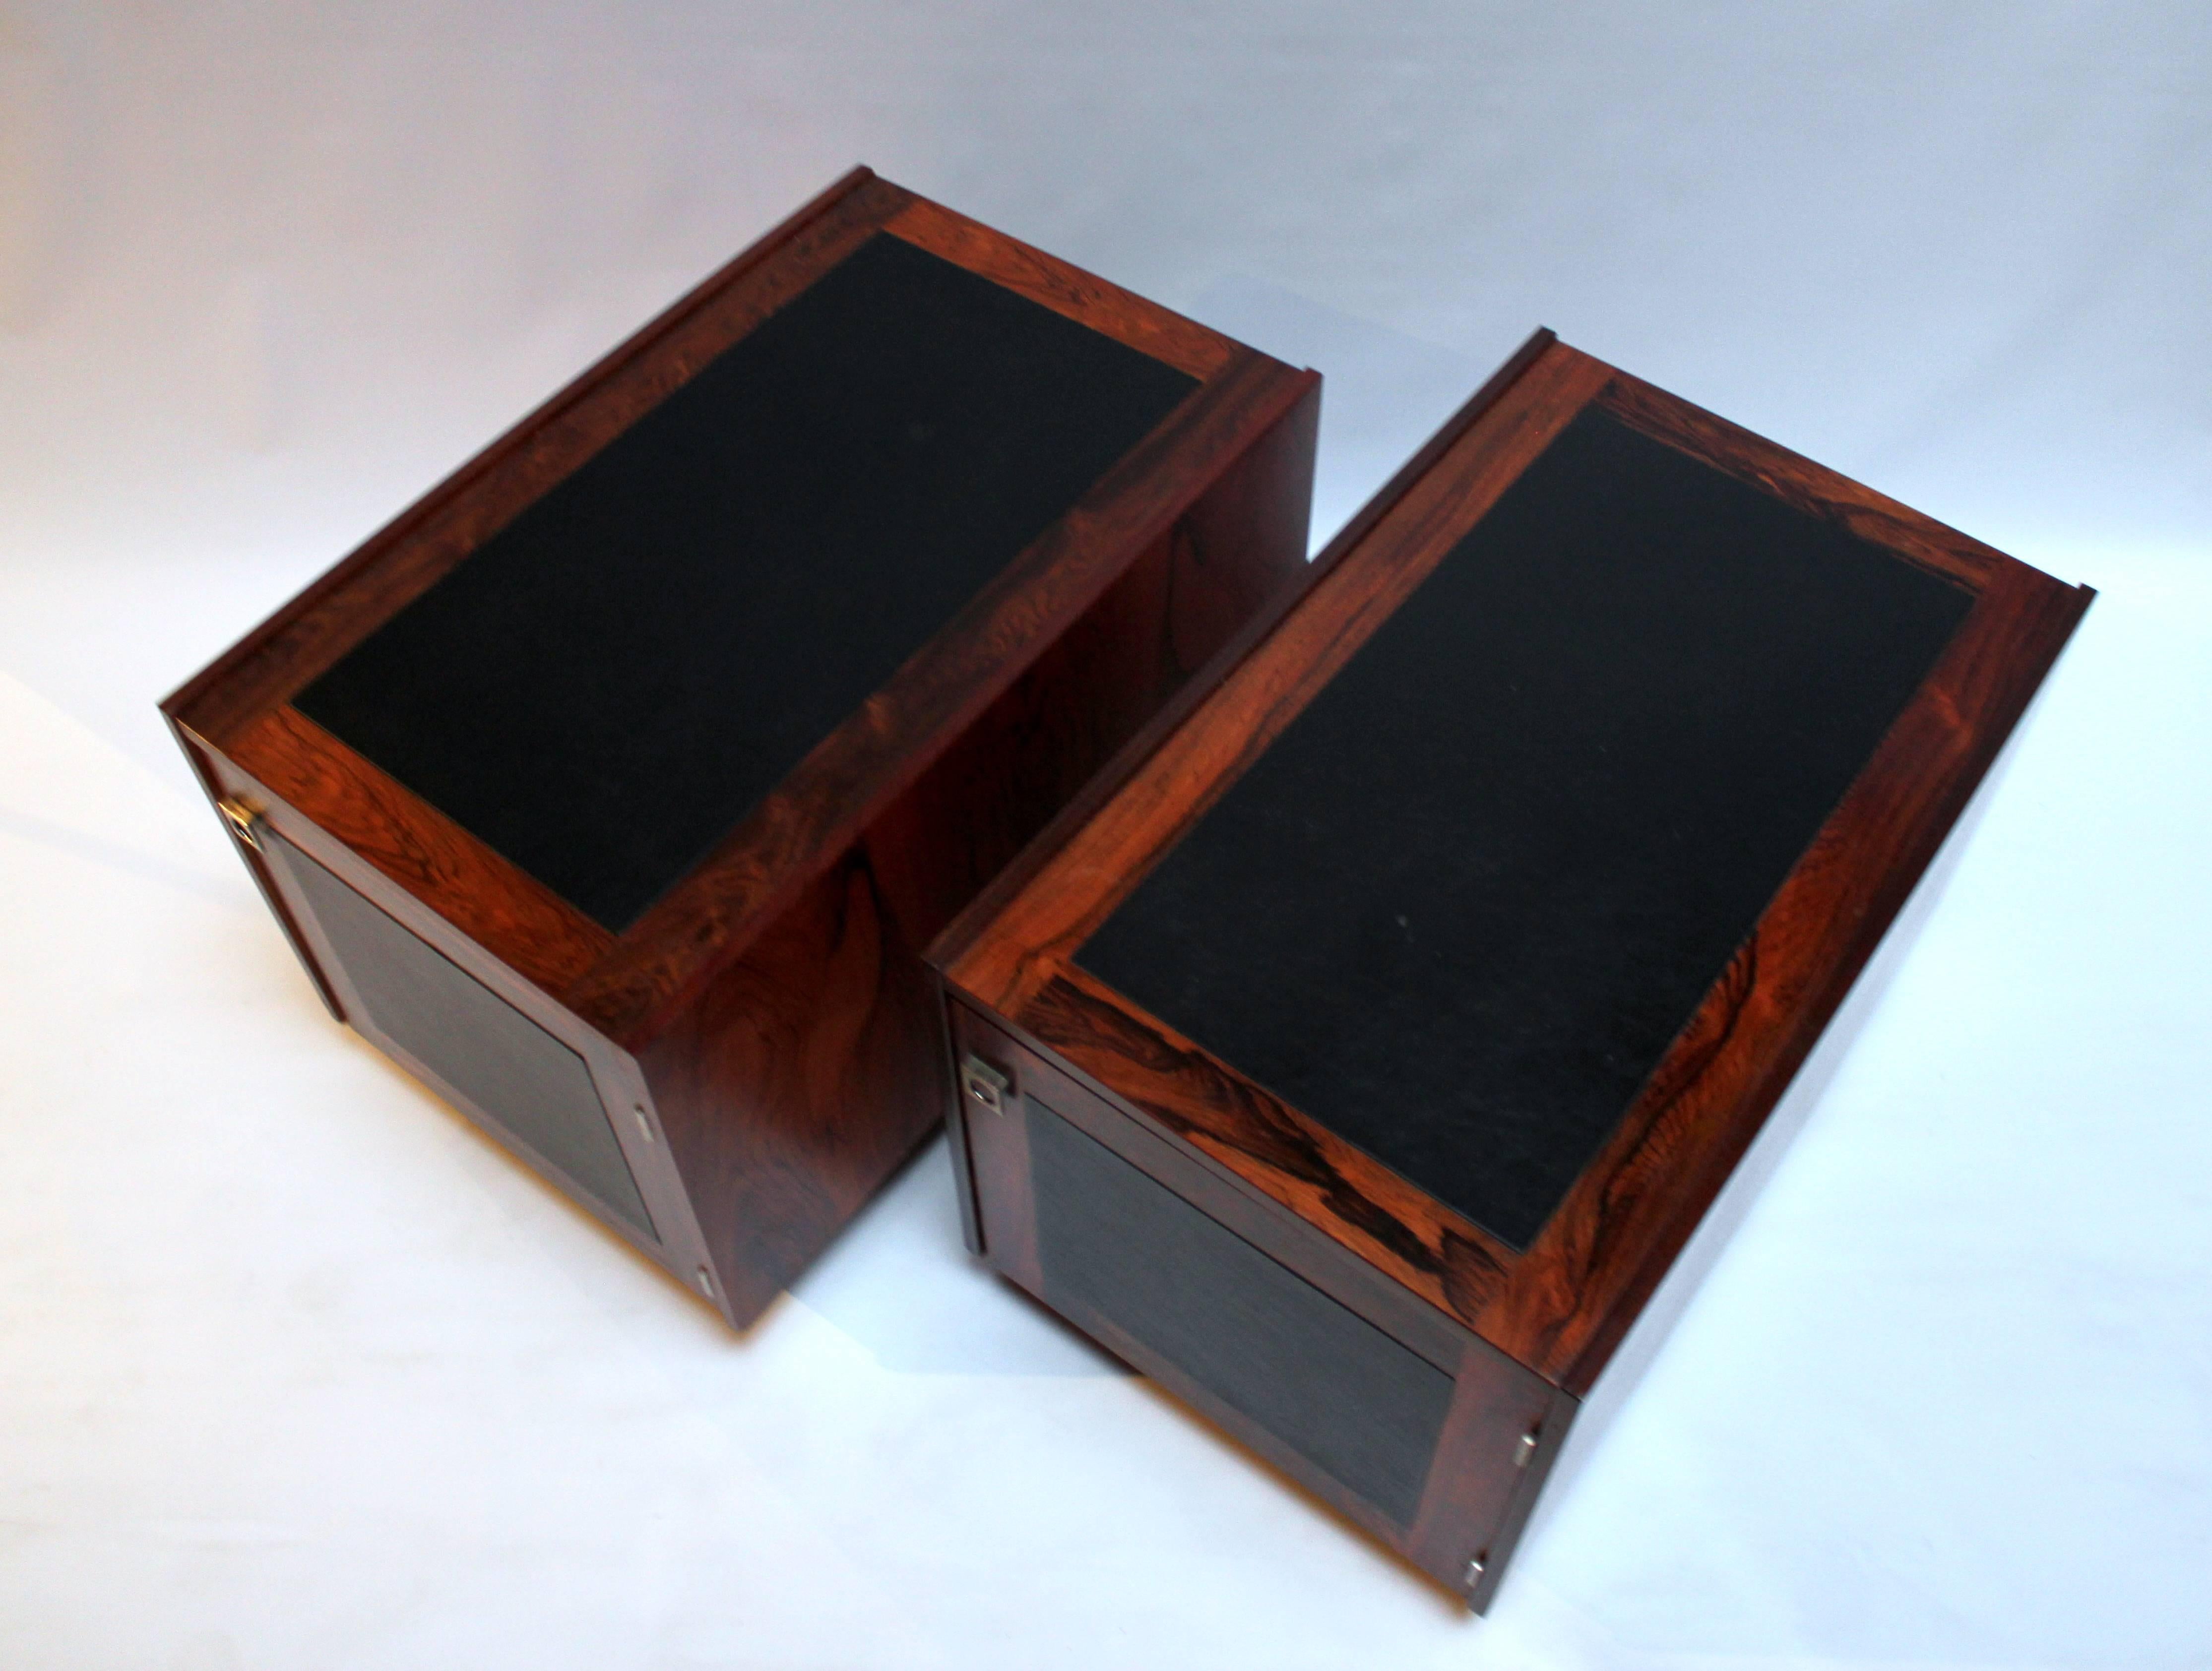 Pair of 1960s Danish modern rosewood and leather side tables by Bornholm. Tables have doors on one side with metal pulls and open storage on other end that's ideally sized for LP storage. Price is for the pair.